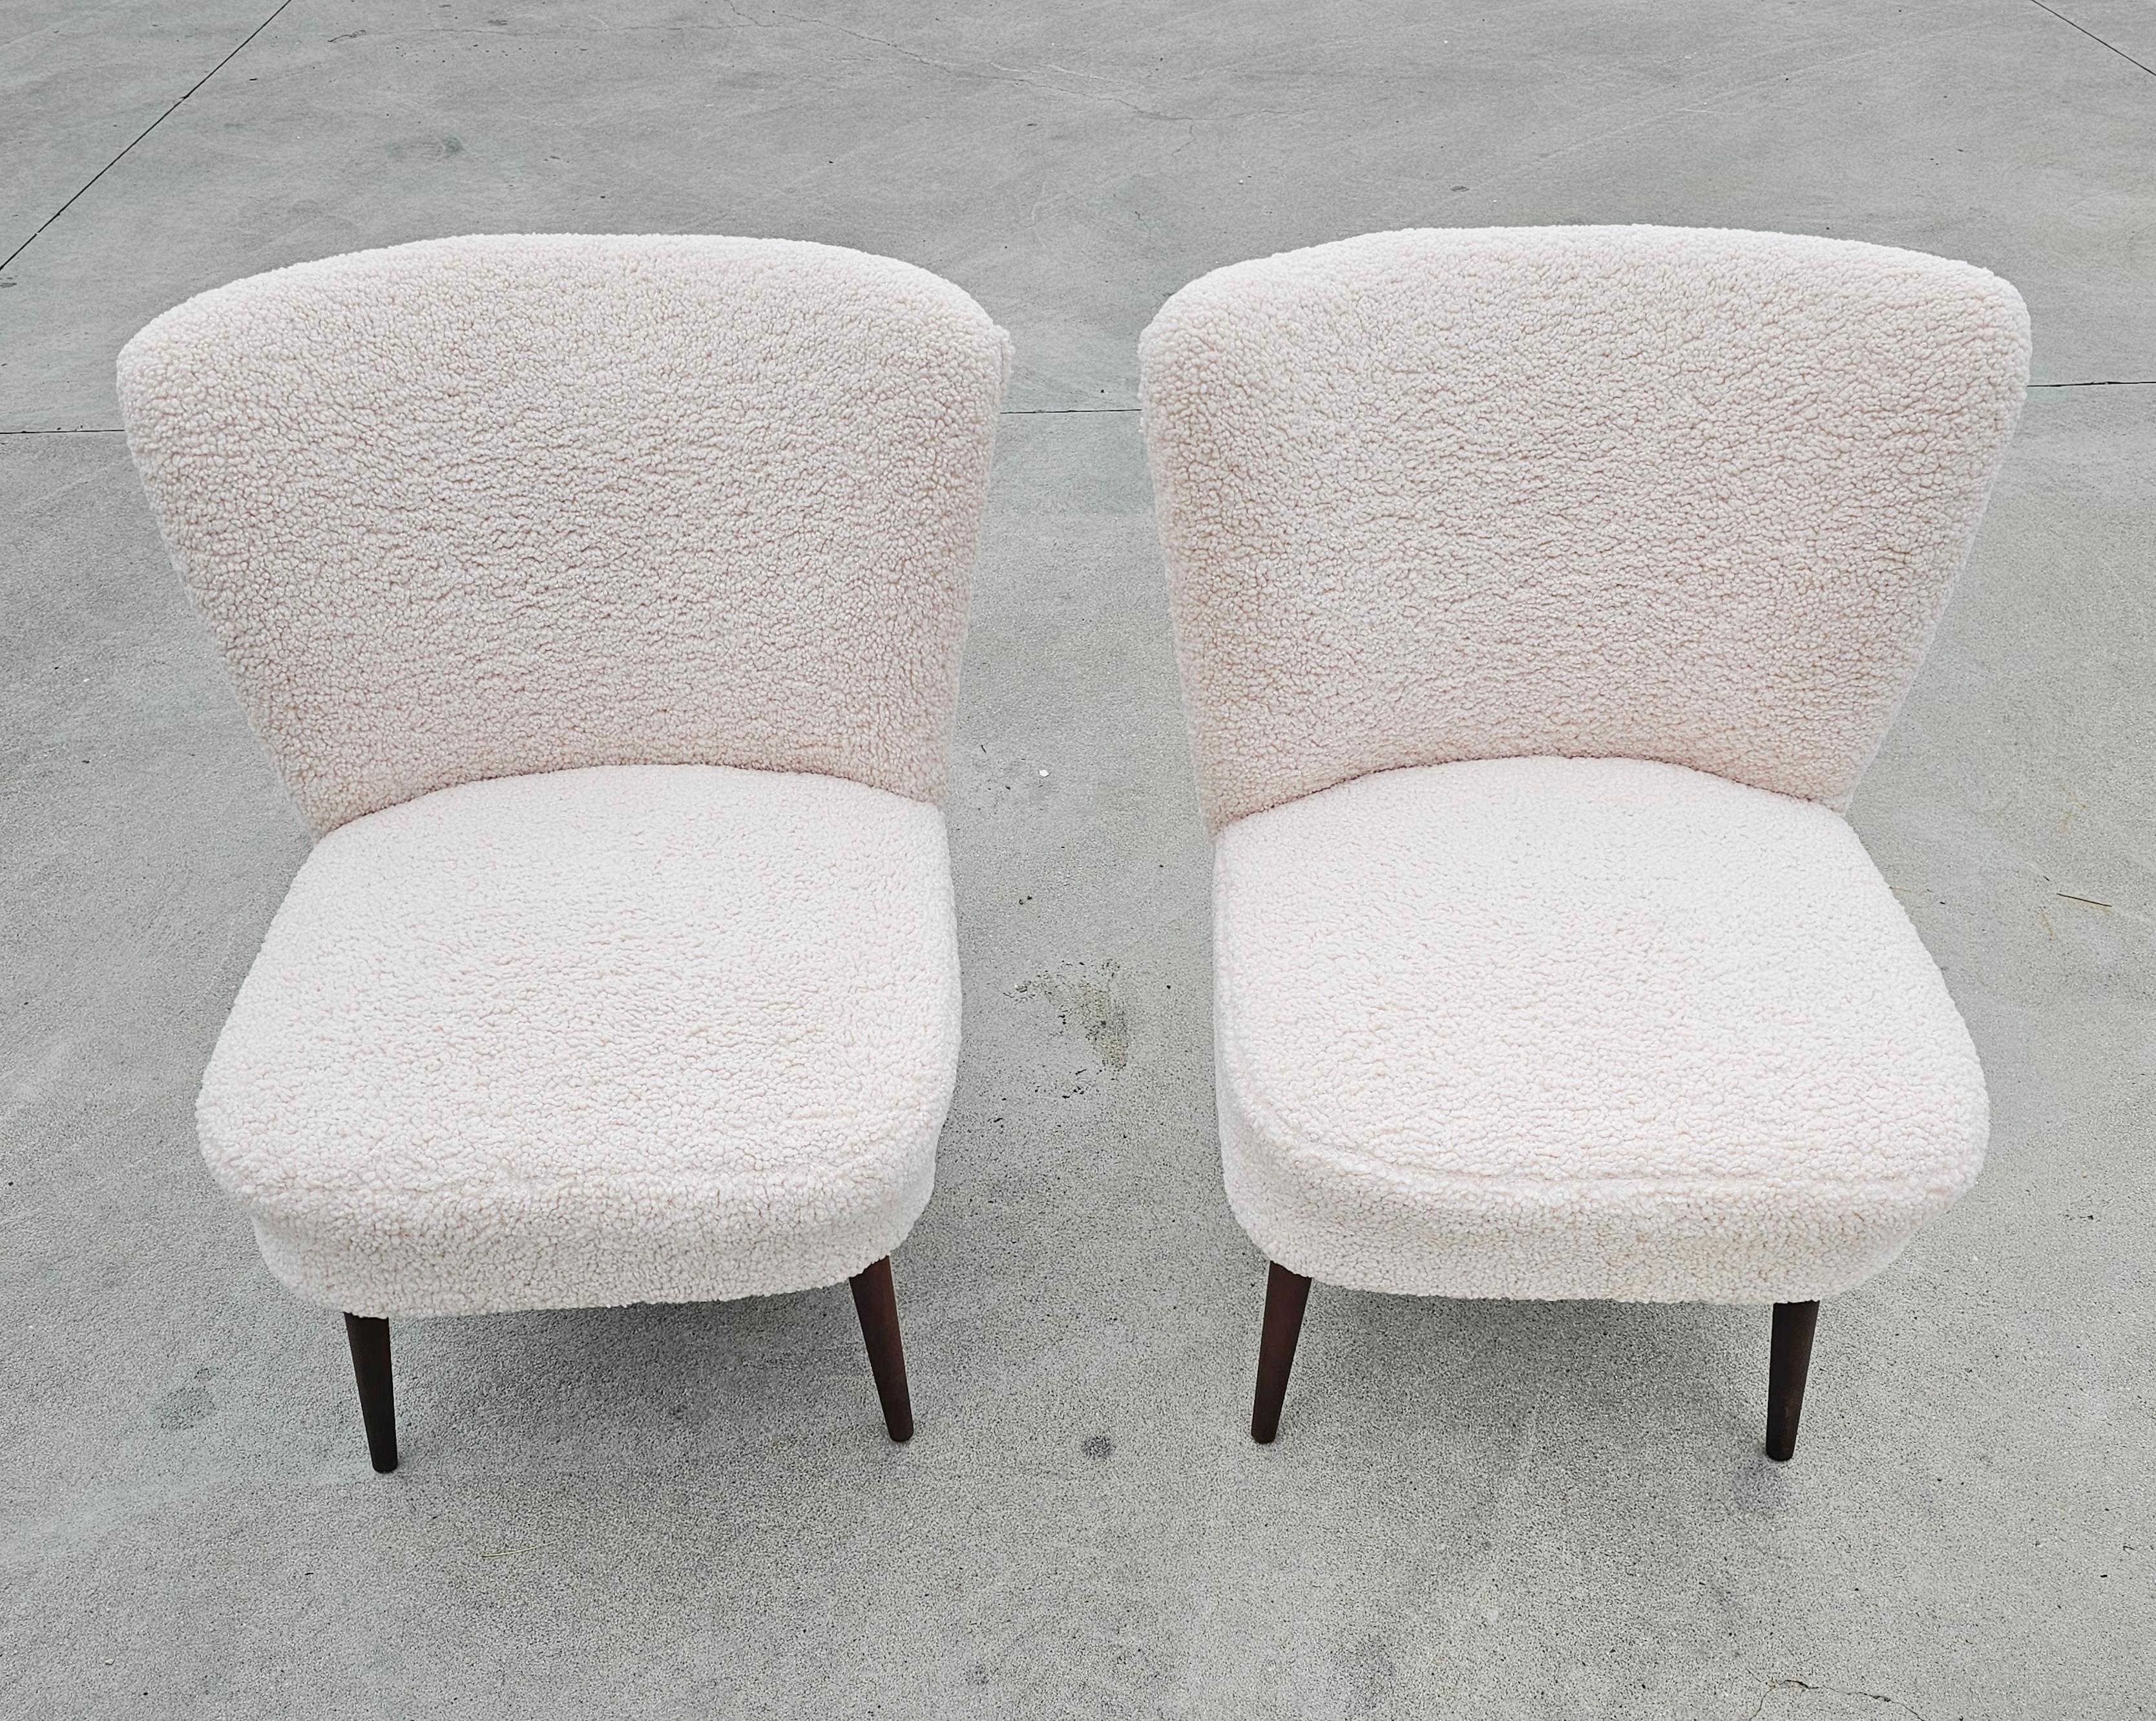 In this listing you will find two Mid-Century Modern Shell Back Cocktail or Lounge Chairs. These two beauties have jut been reupholstered with a luxurious Teddy fabric in off-white that imitates lamb's skin. Soft at touch and very comfortable, the